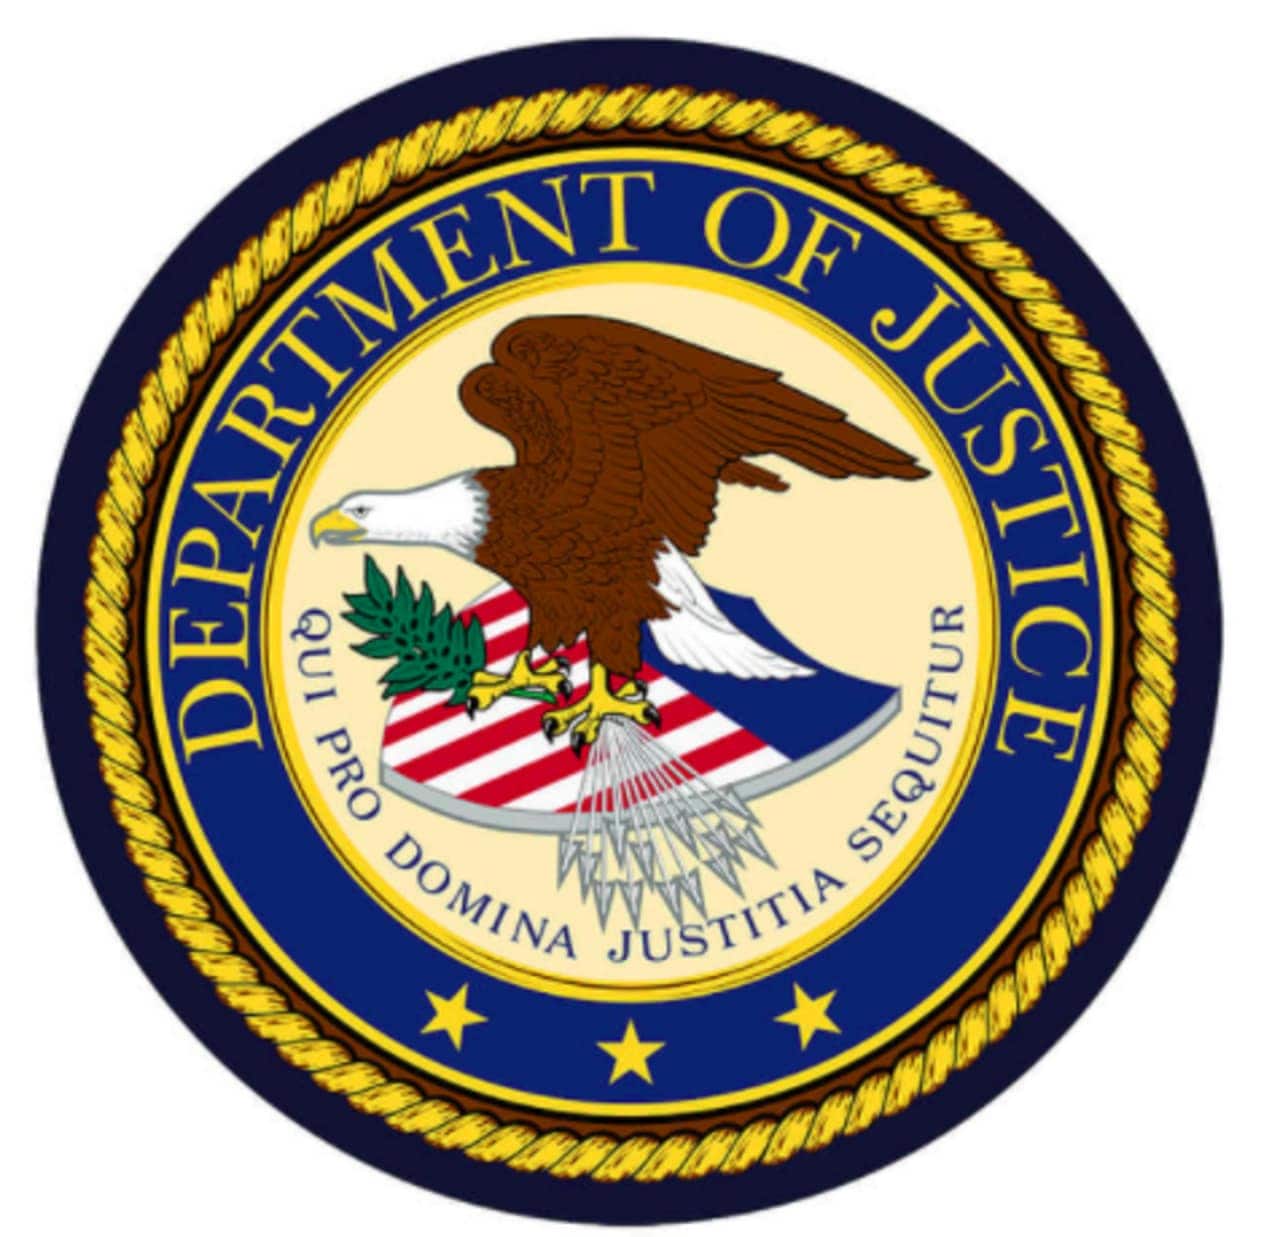 A Waterbury man was sentenced-to federal prison for a multi-state-robbery spree, according to the U.S. Justice Department.